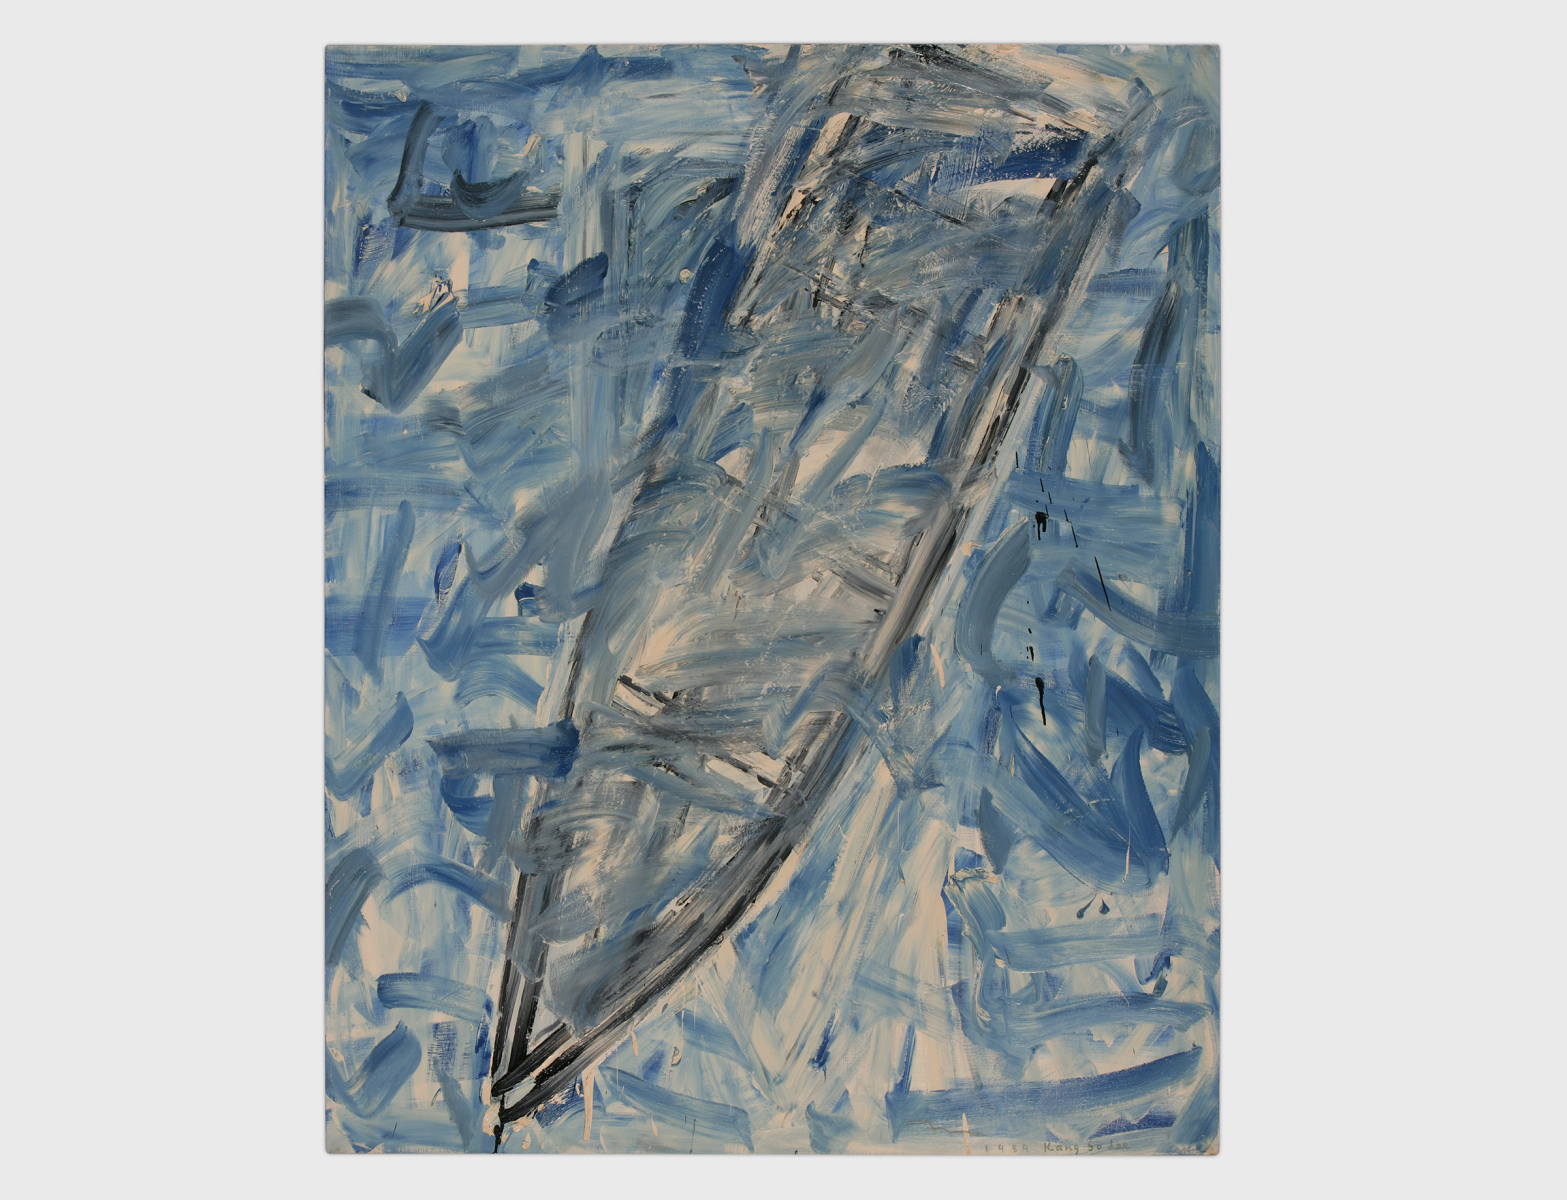 Untitled-89007, 1989, Oil on Canvas, 130.3x162cm